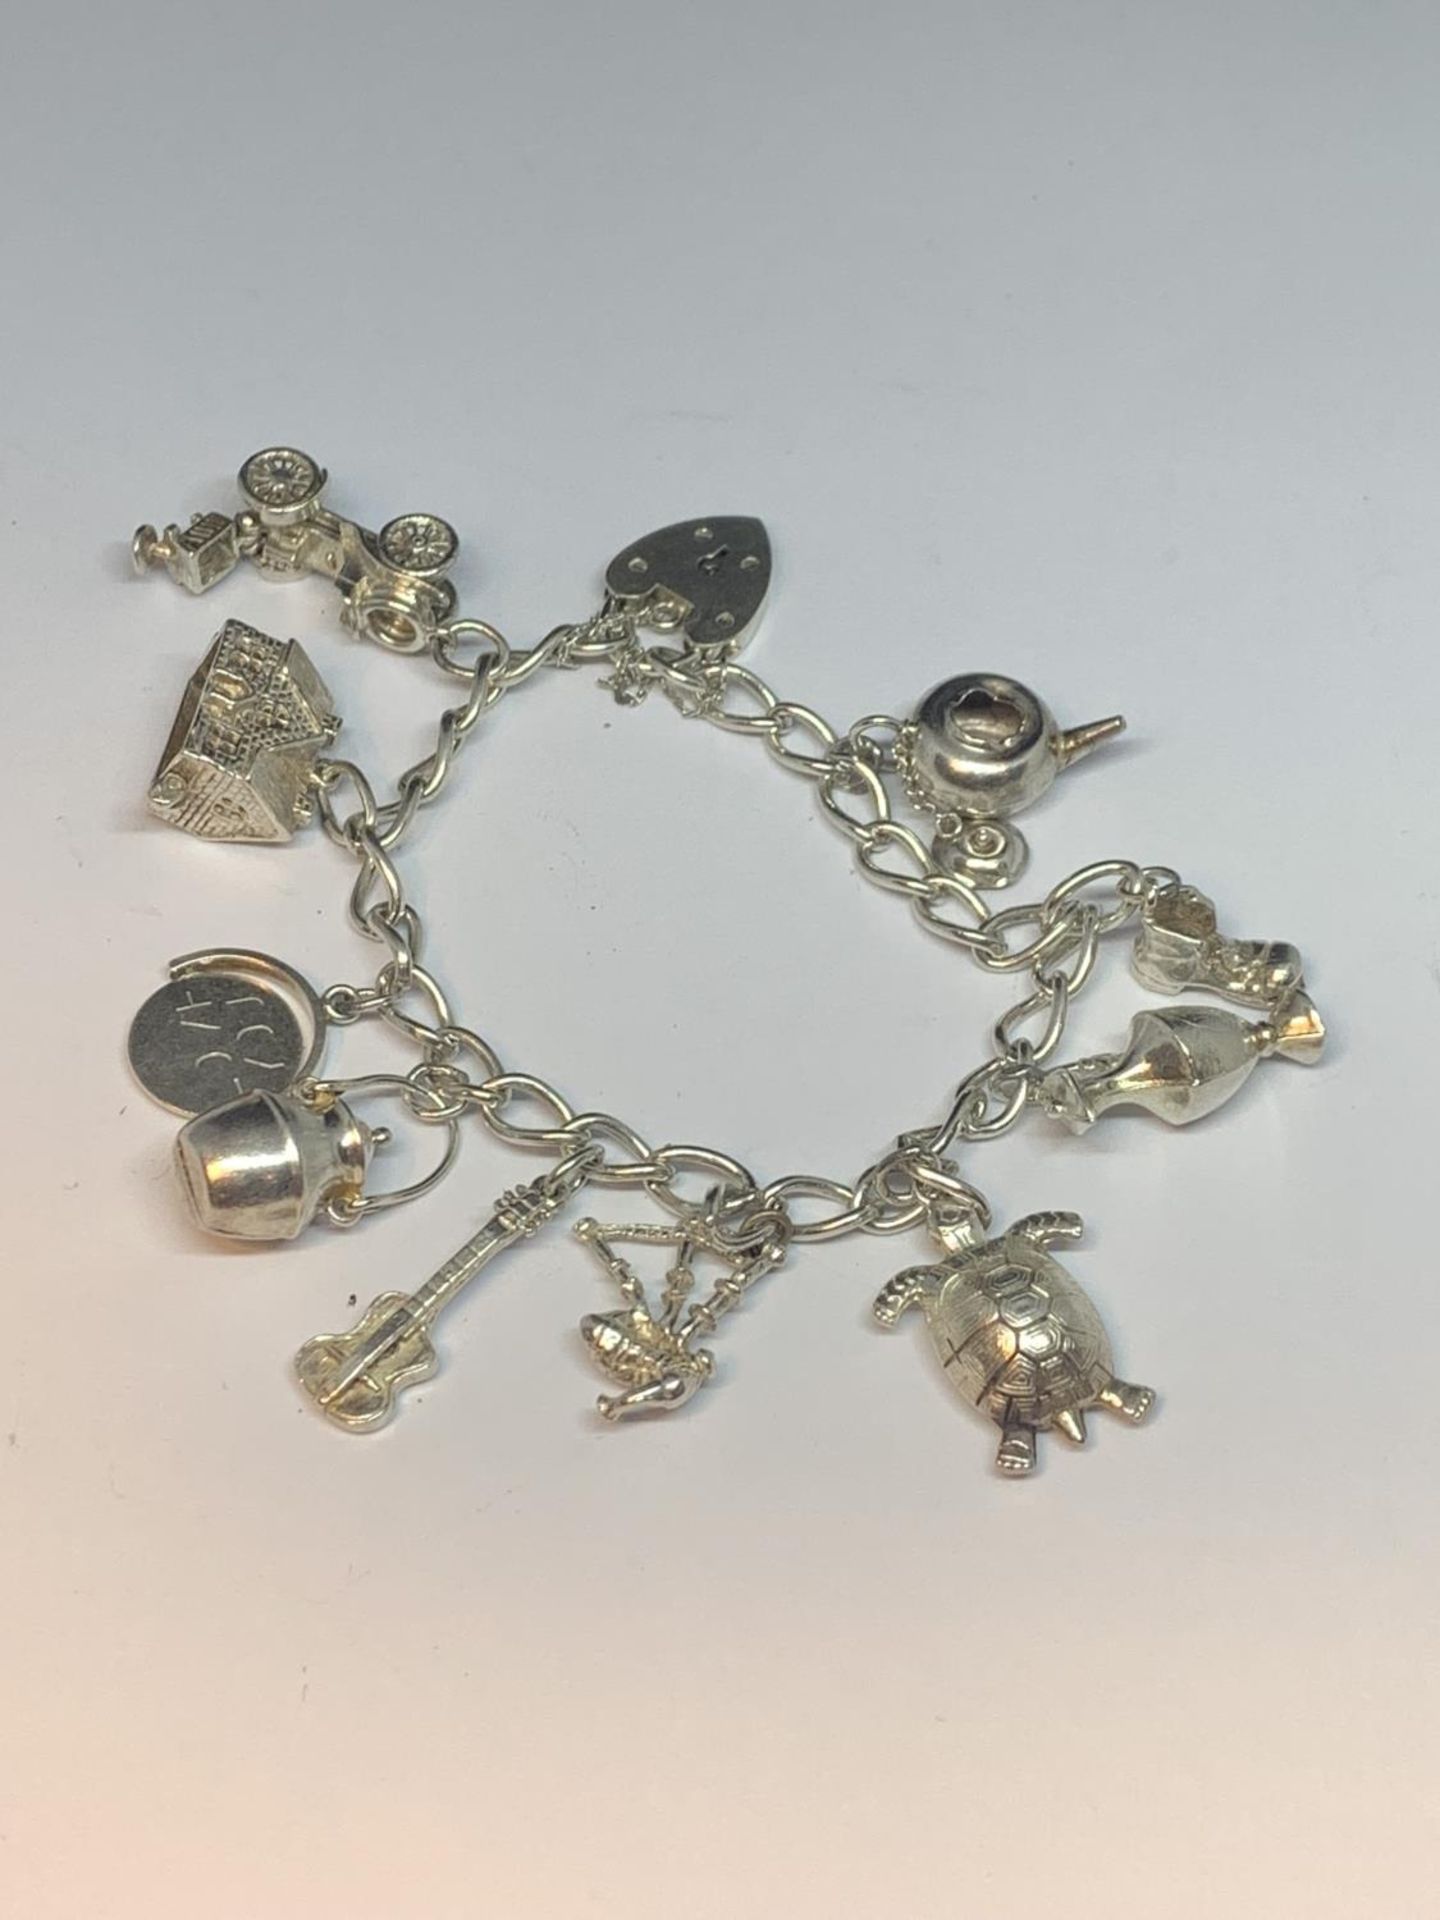 A SILVER CHARM BRACELET WITH TEN CHARMS AND A HEART LOCK